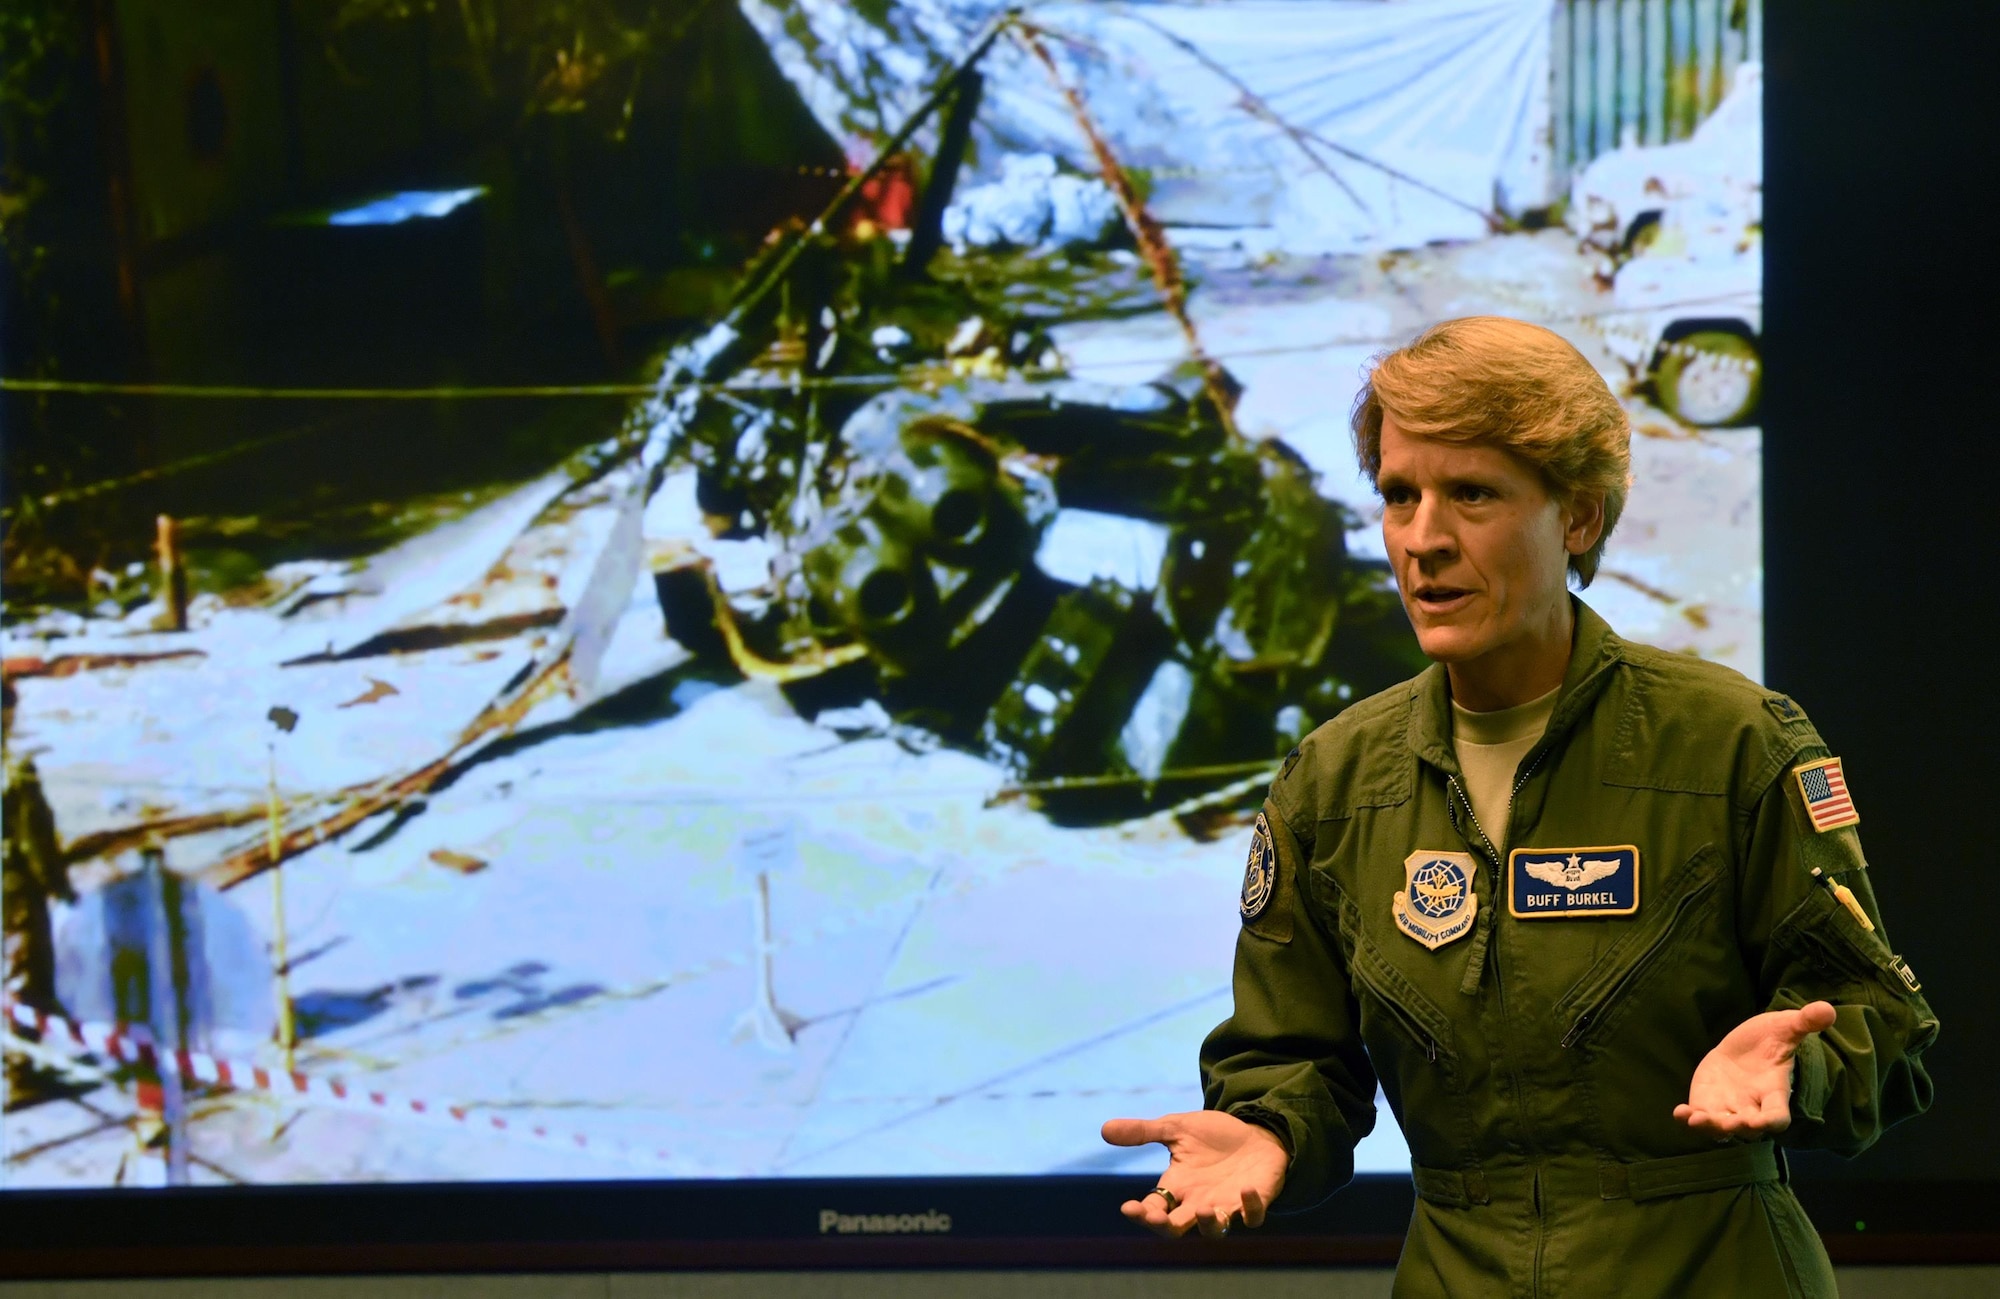 Col. Laurel Burkel, a C-130H Hercules navigator, survived a broken neck during a helicopter crash in Afghanistan, 2015. She tells her story to a group of writers from various publications during the “Real Airmen, Real Stories” portion of the Air Force’s third annual Magazine Day at the Pentagon in Washington, D.C., June 21, 2017. (U.S. Air Force photo/Wayne A. Clark)